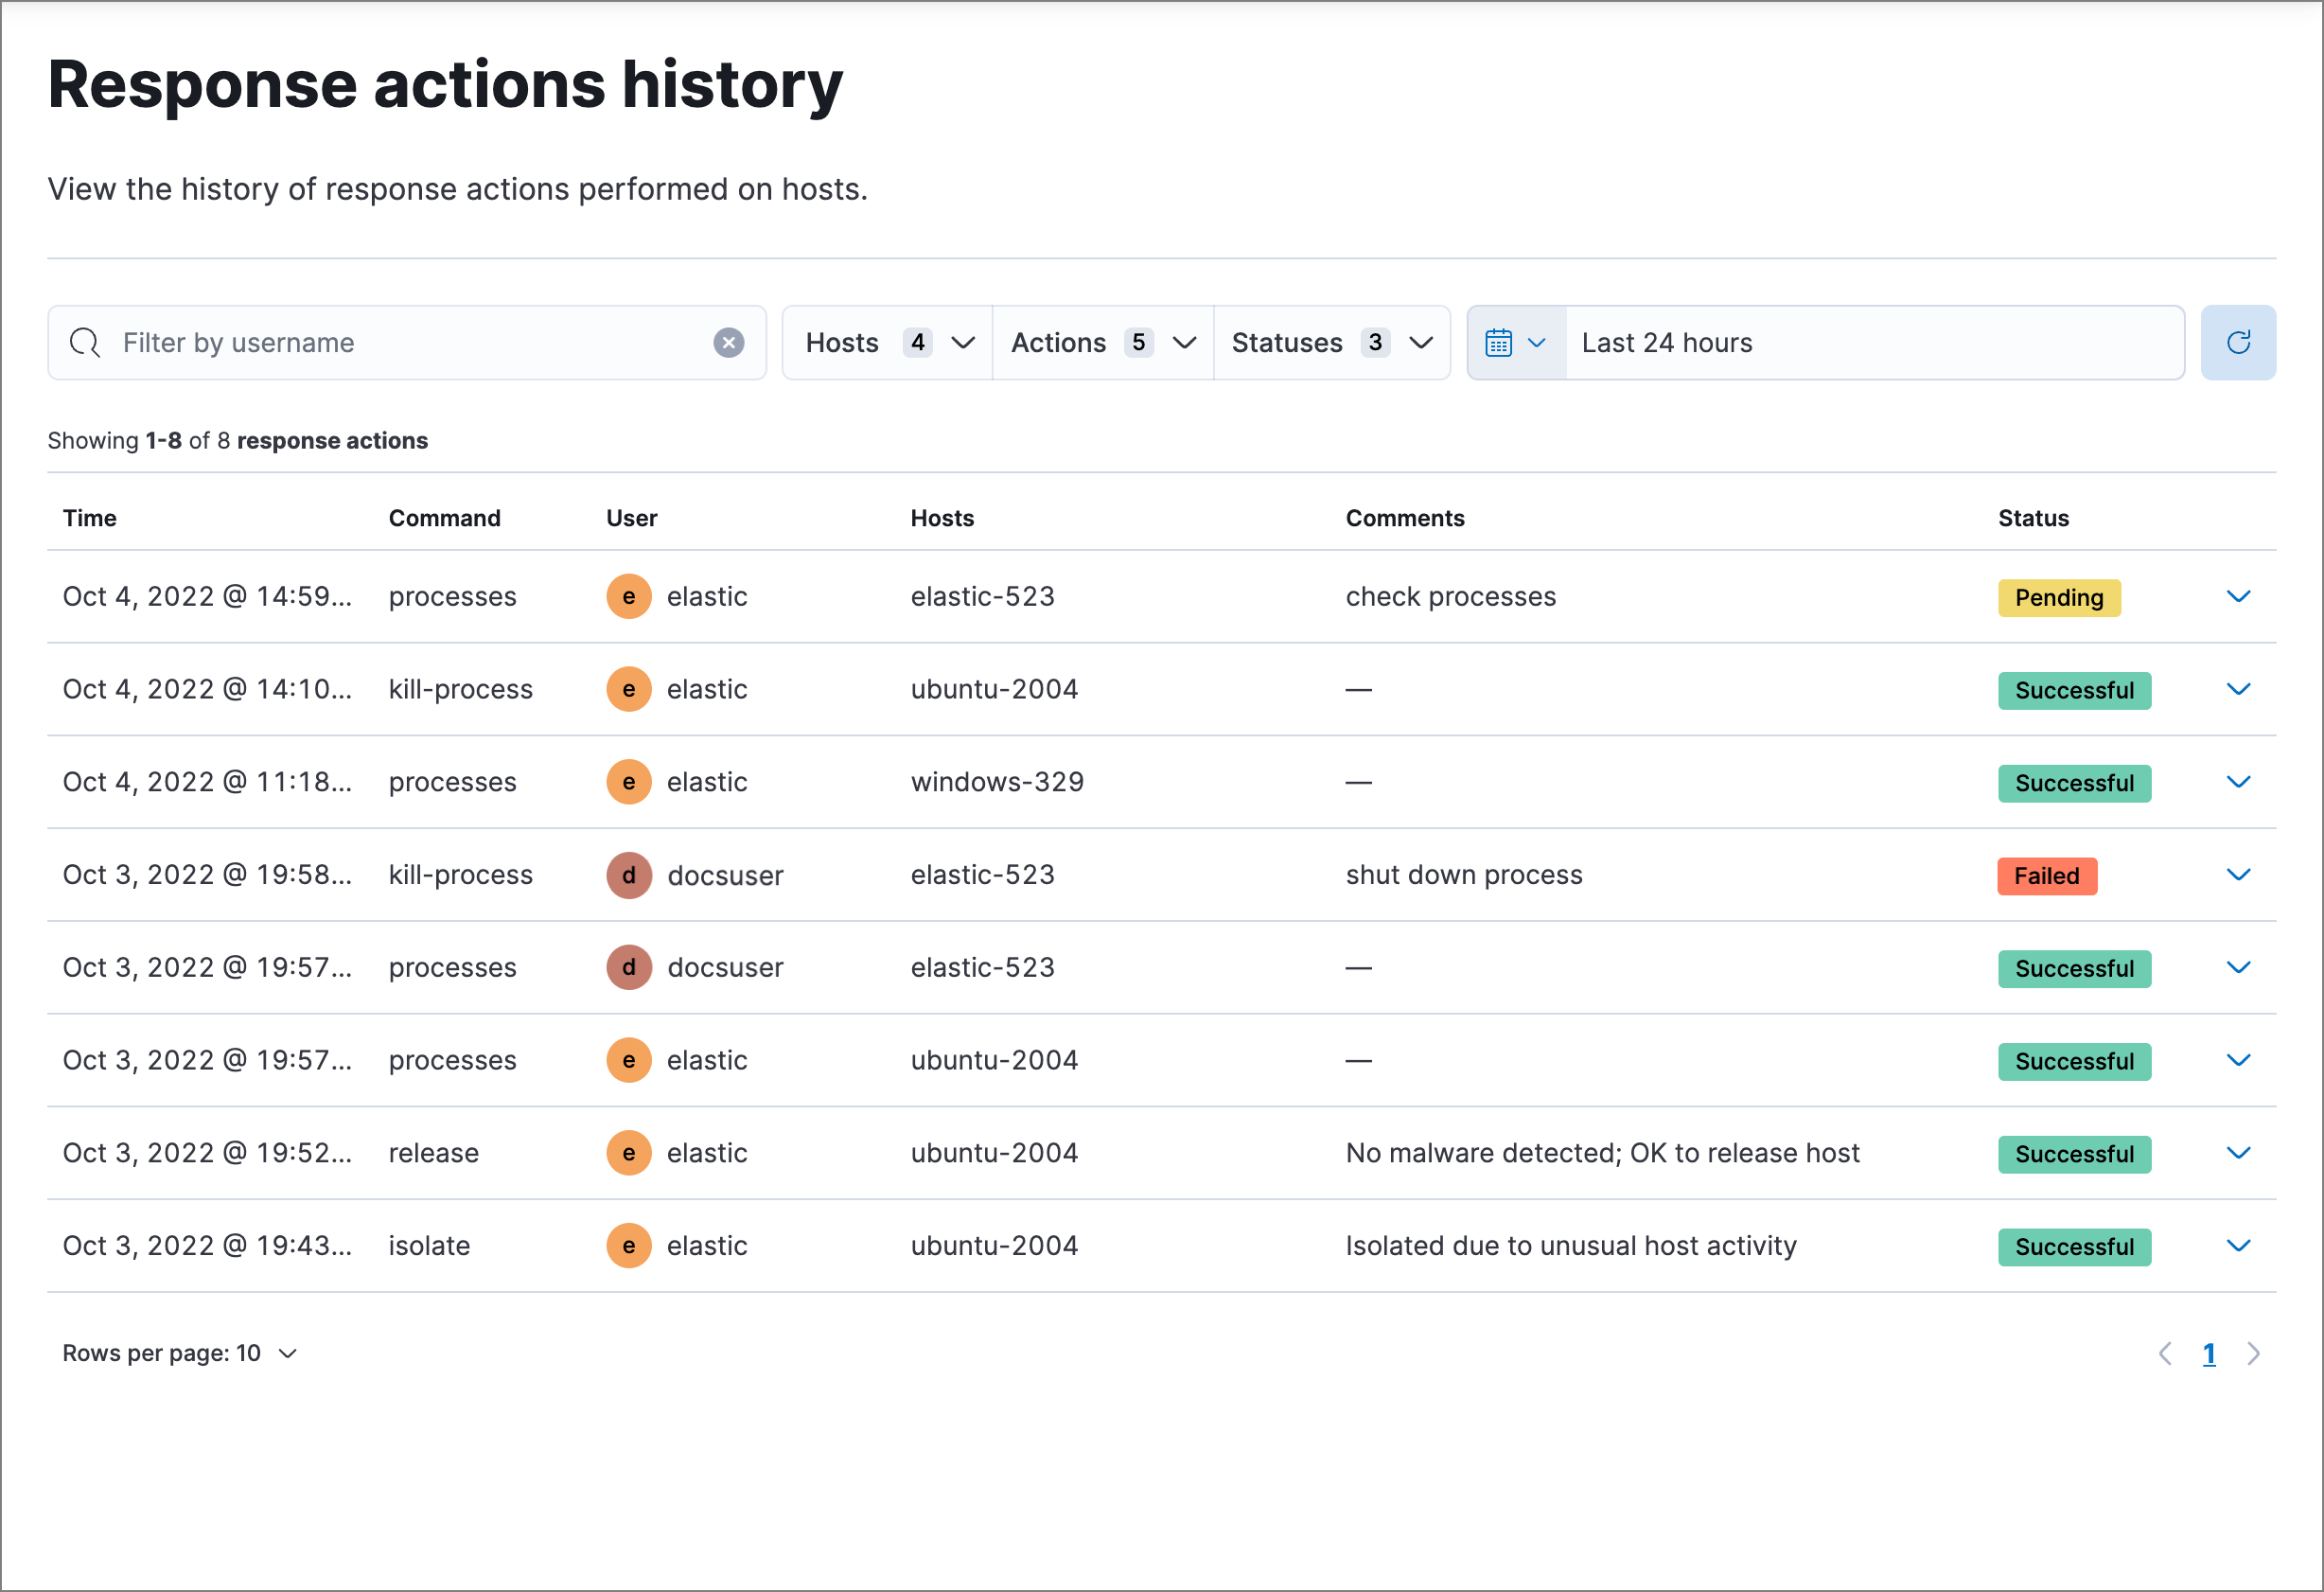 Response actions history page UI